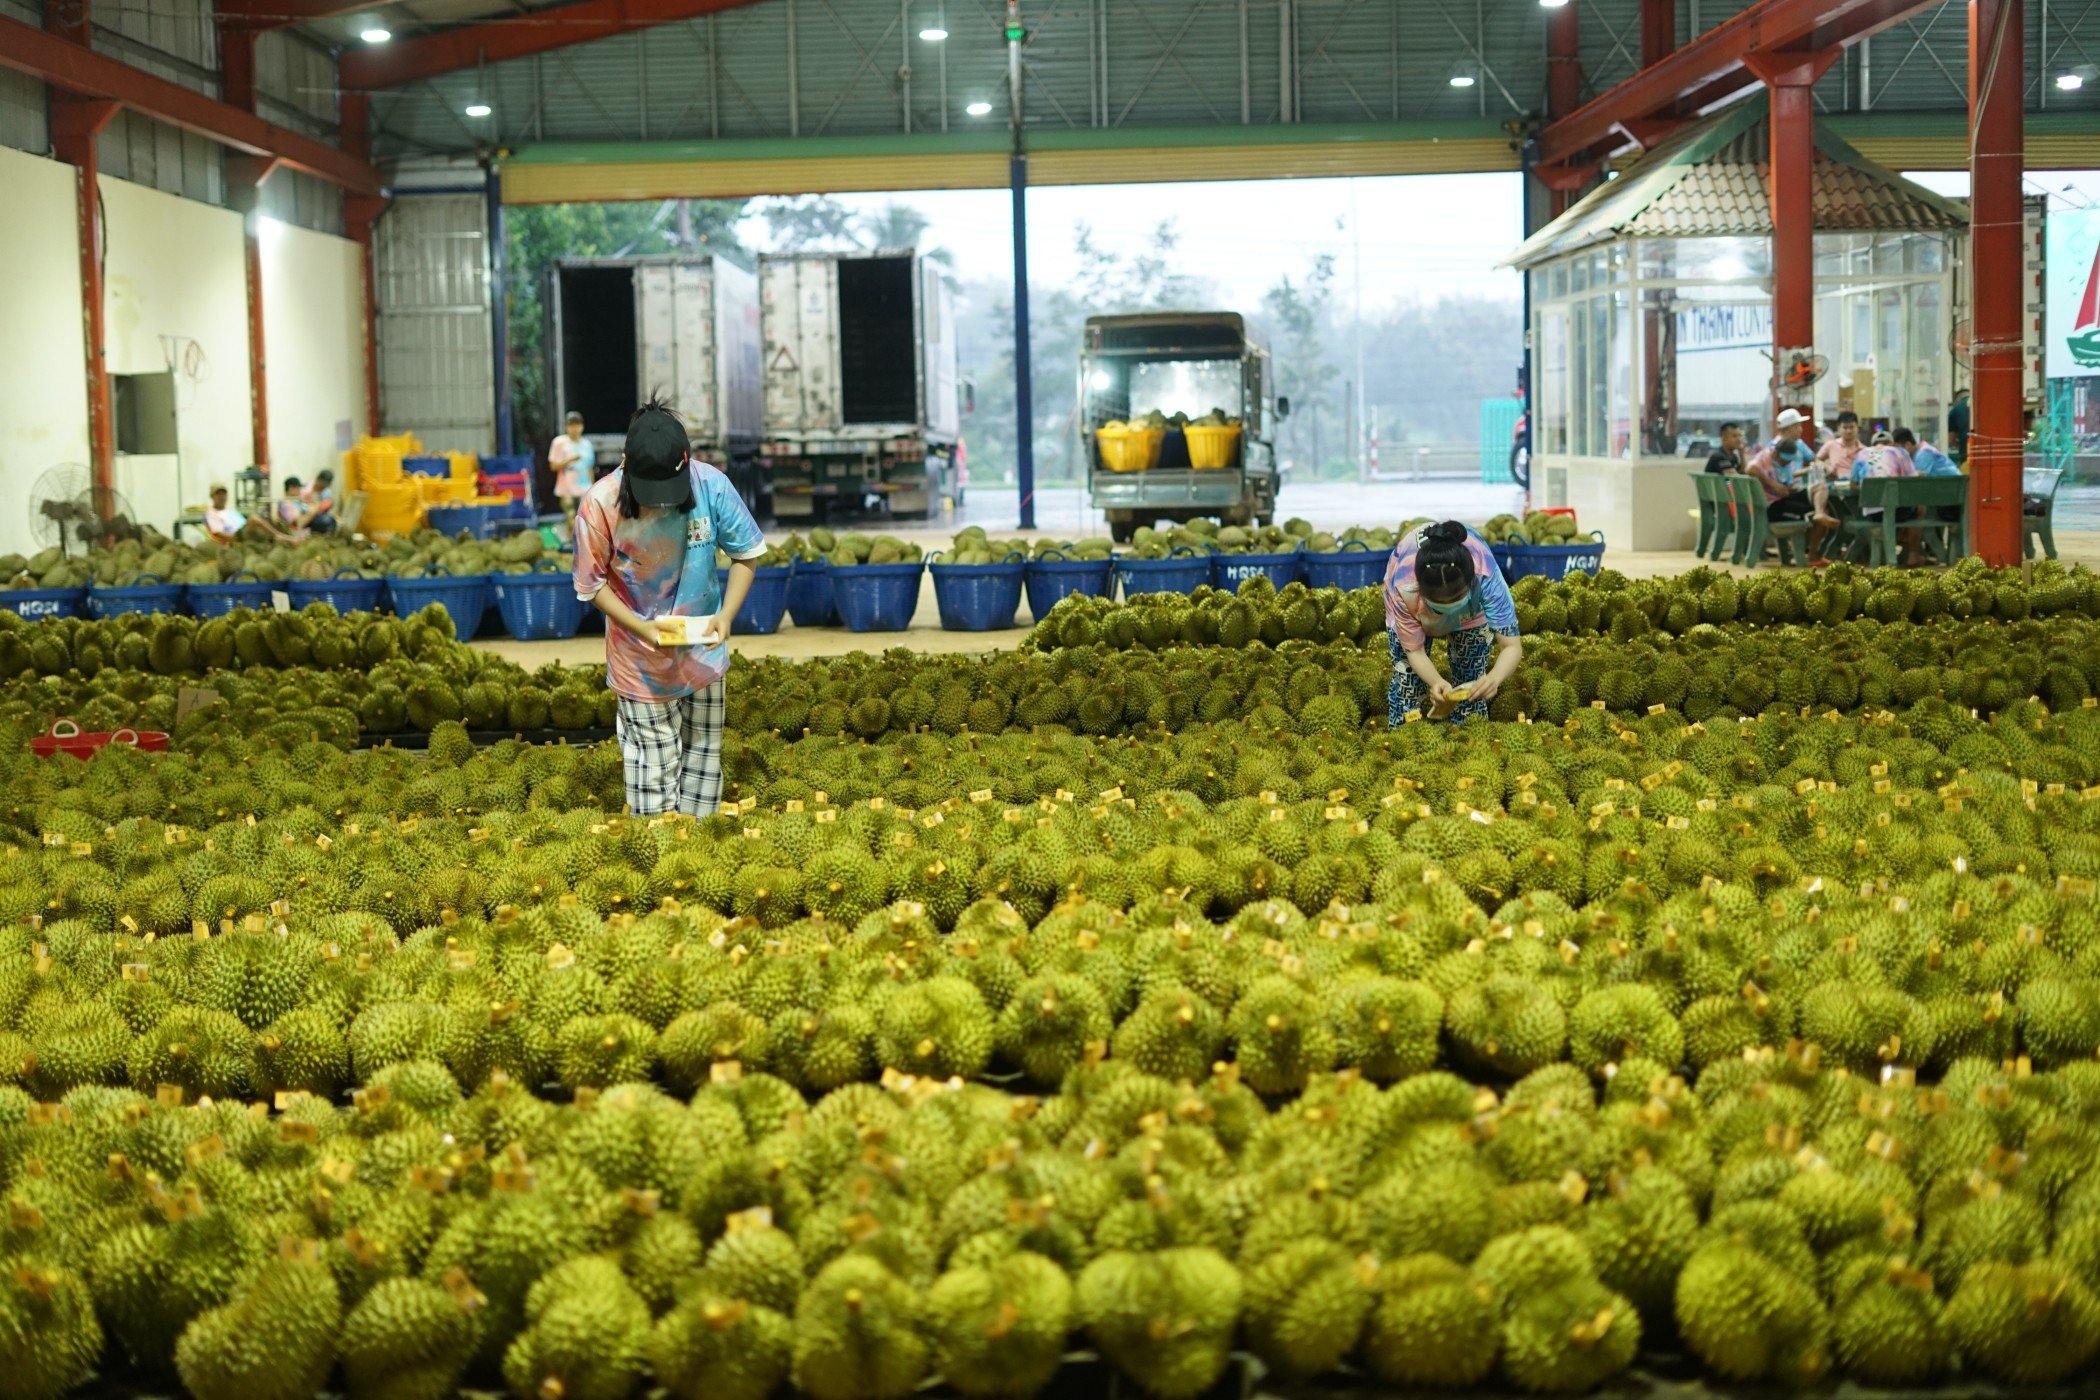 Alternative sources of durians like Vietnam and the Philippines are gaining ground on Thailand in China’s lucrative market. Photo: Xinhua